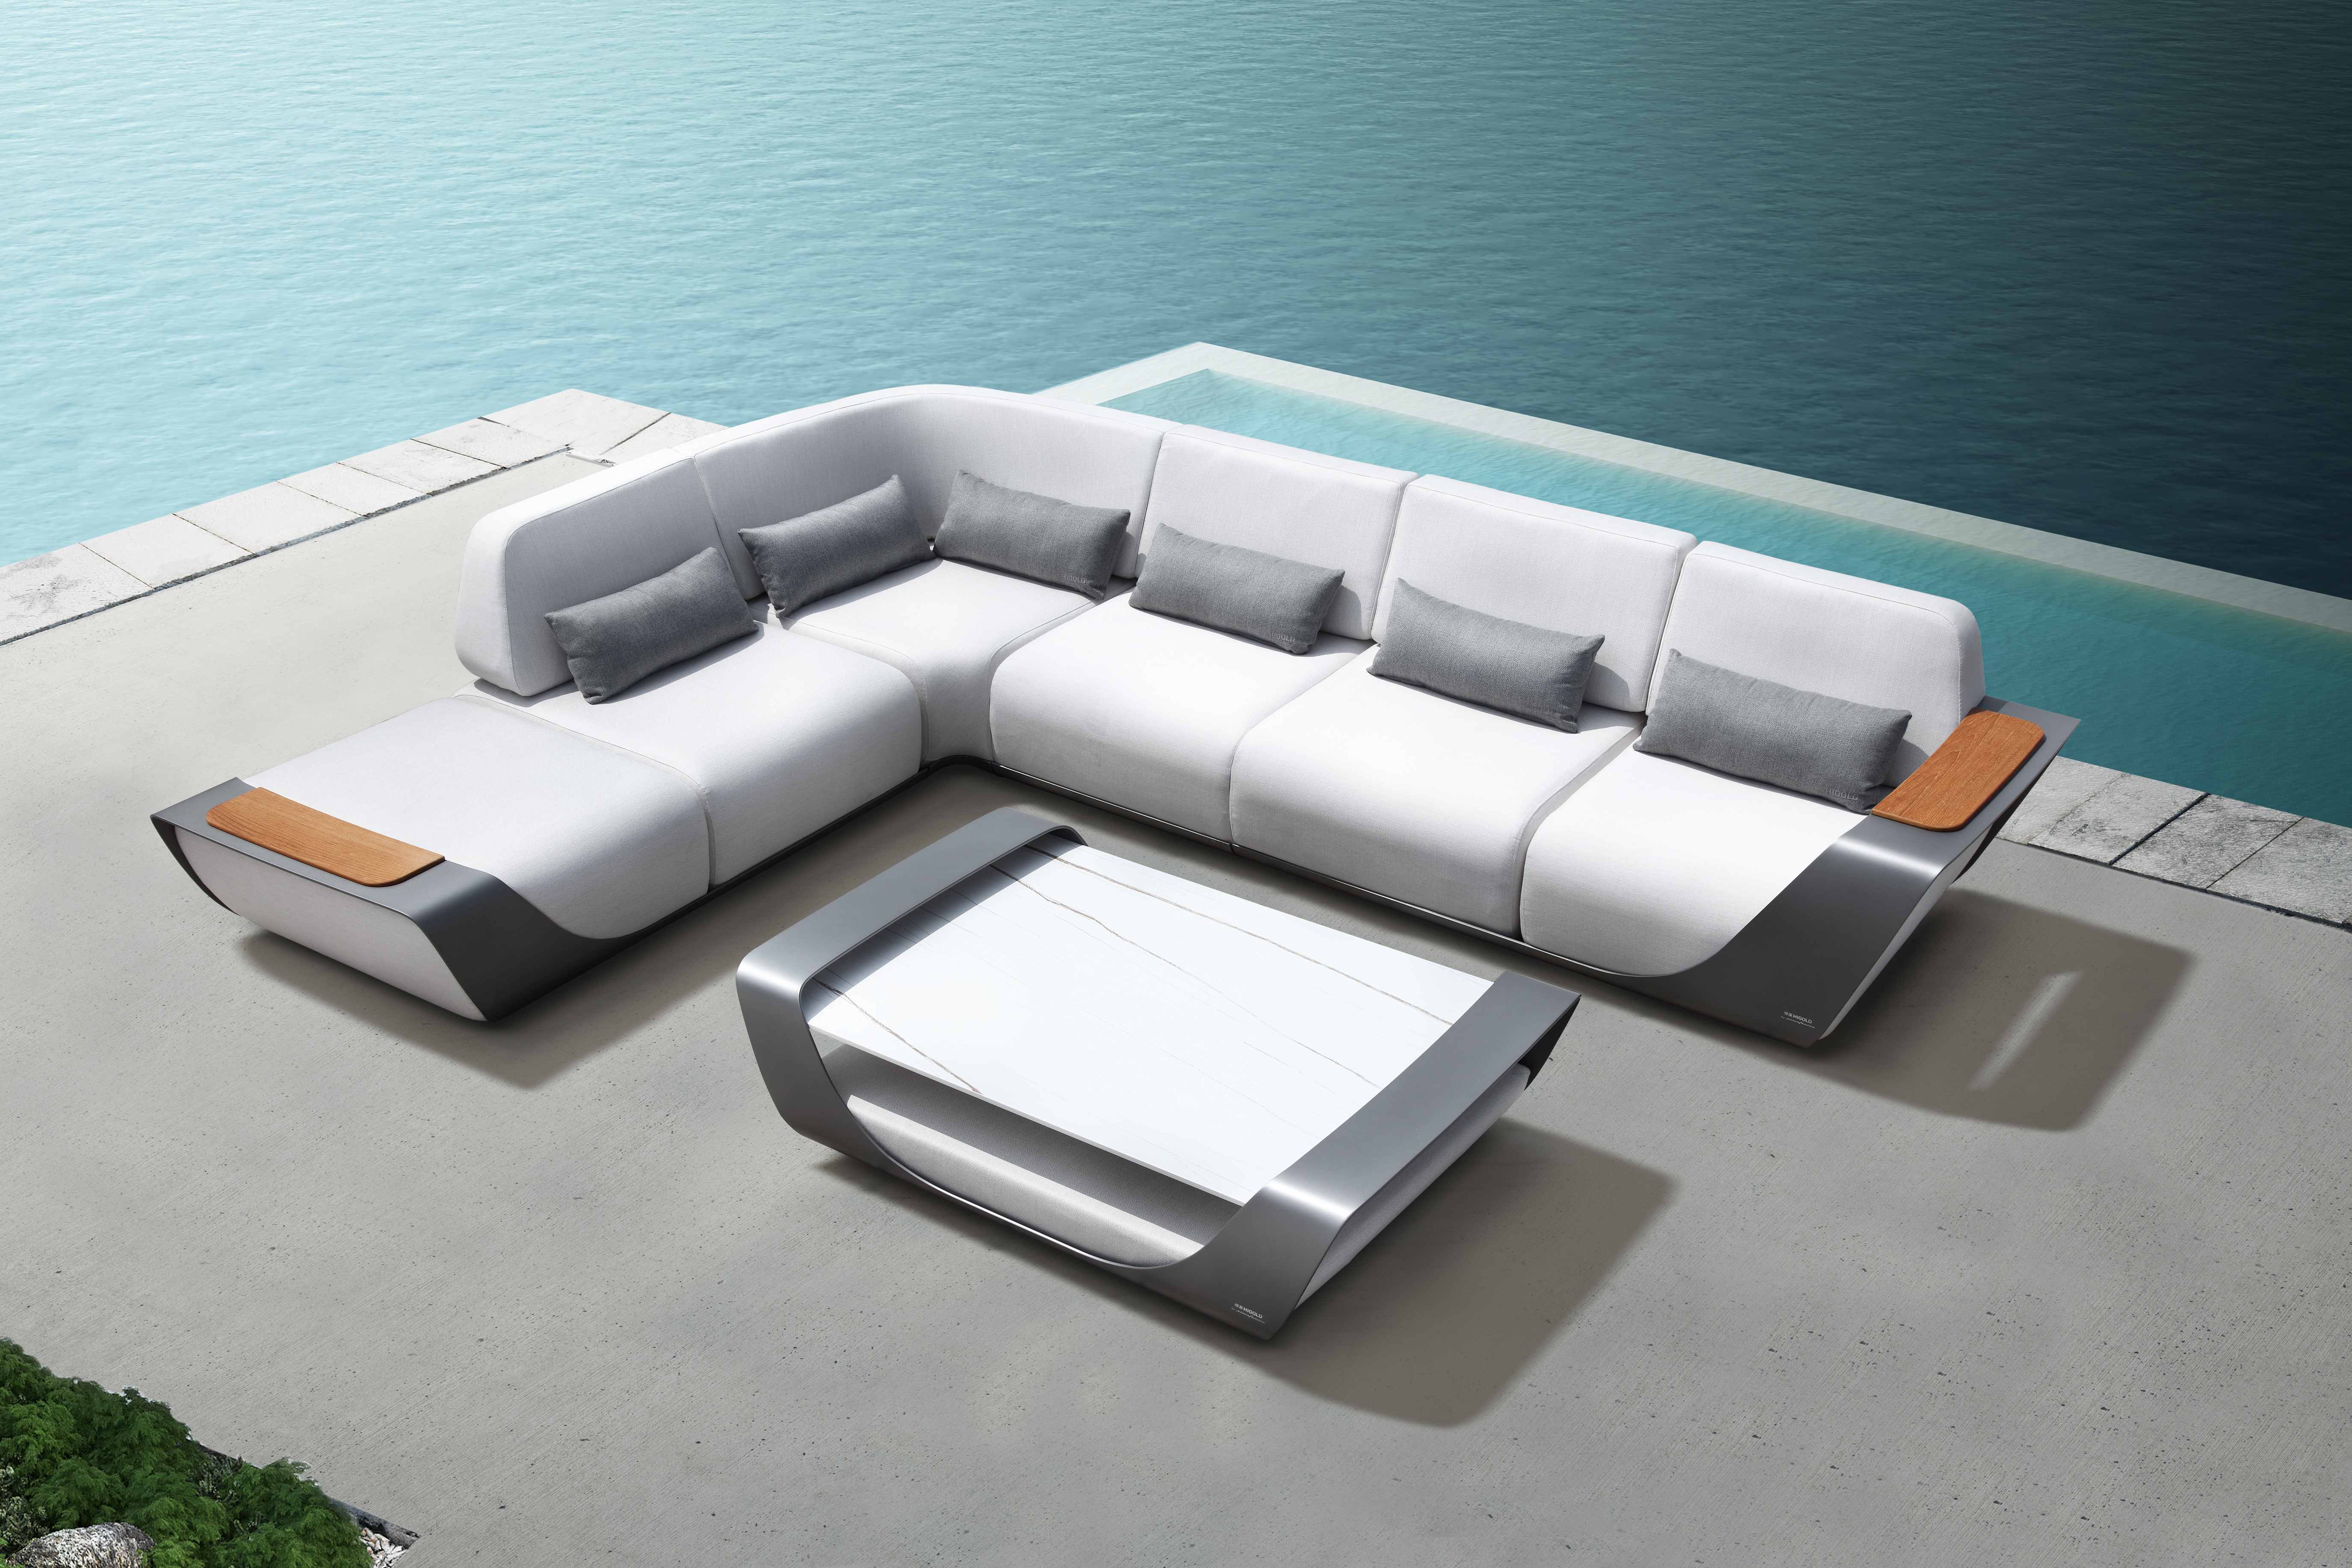 Onda outdoor sectional sofa with high back